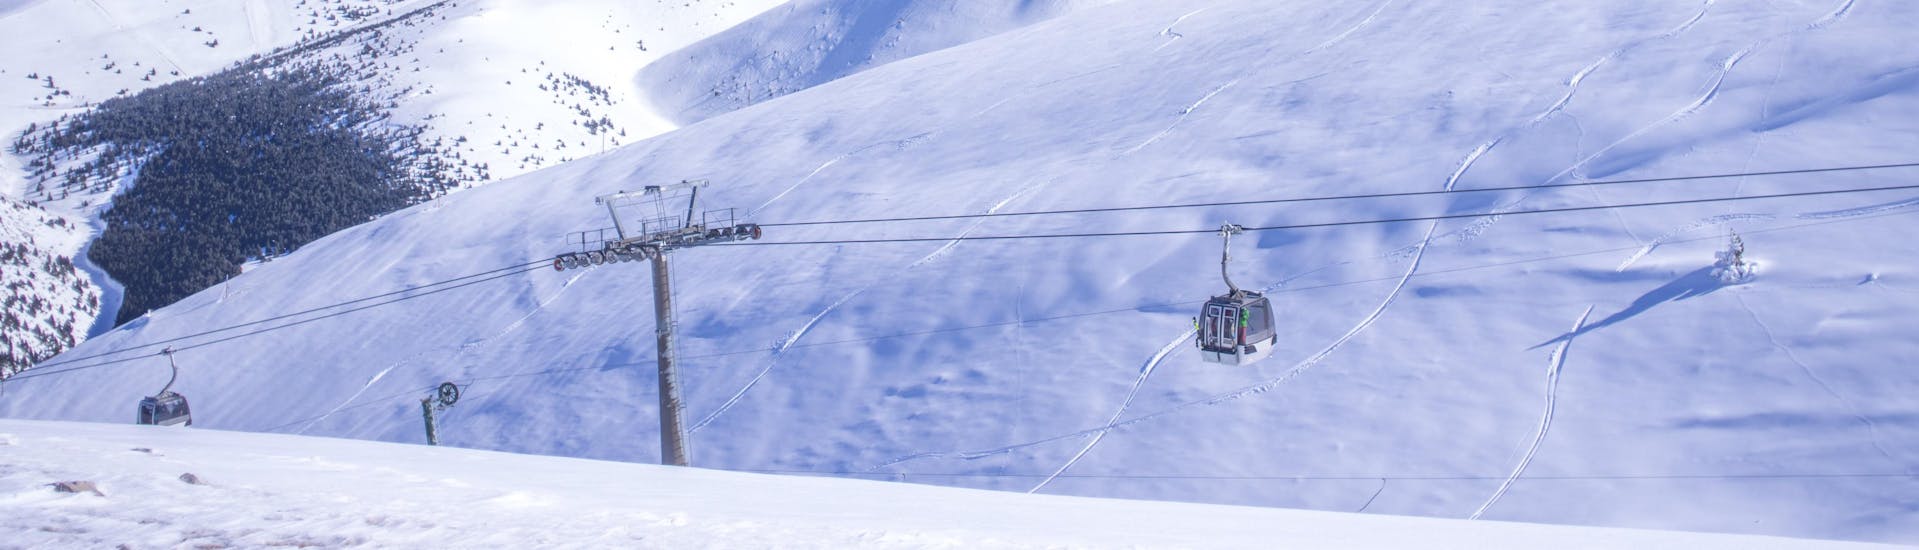 An image of a gondola carrying skiers up to the top of the mountain in the Catalonian ski resort of La Molina, where visitors can book ski lessons with one of the local ski schools. 